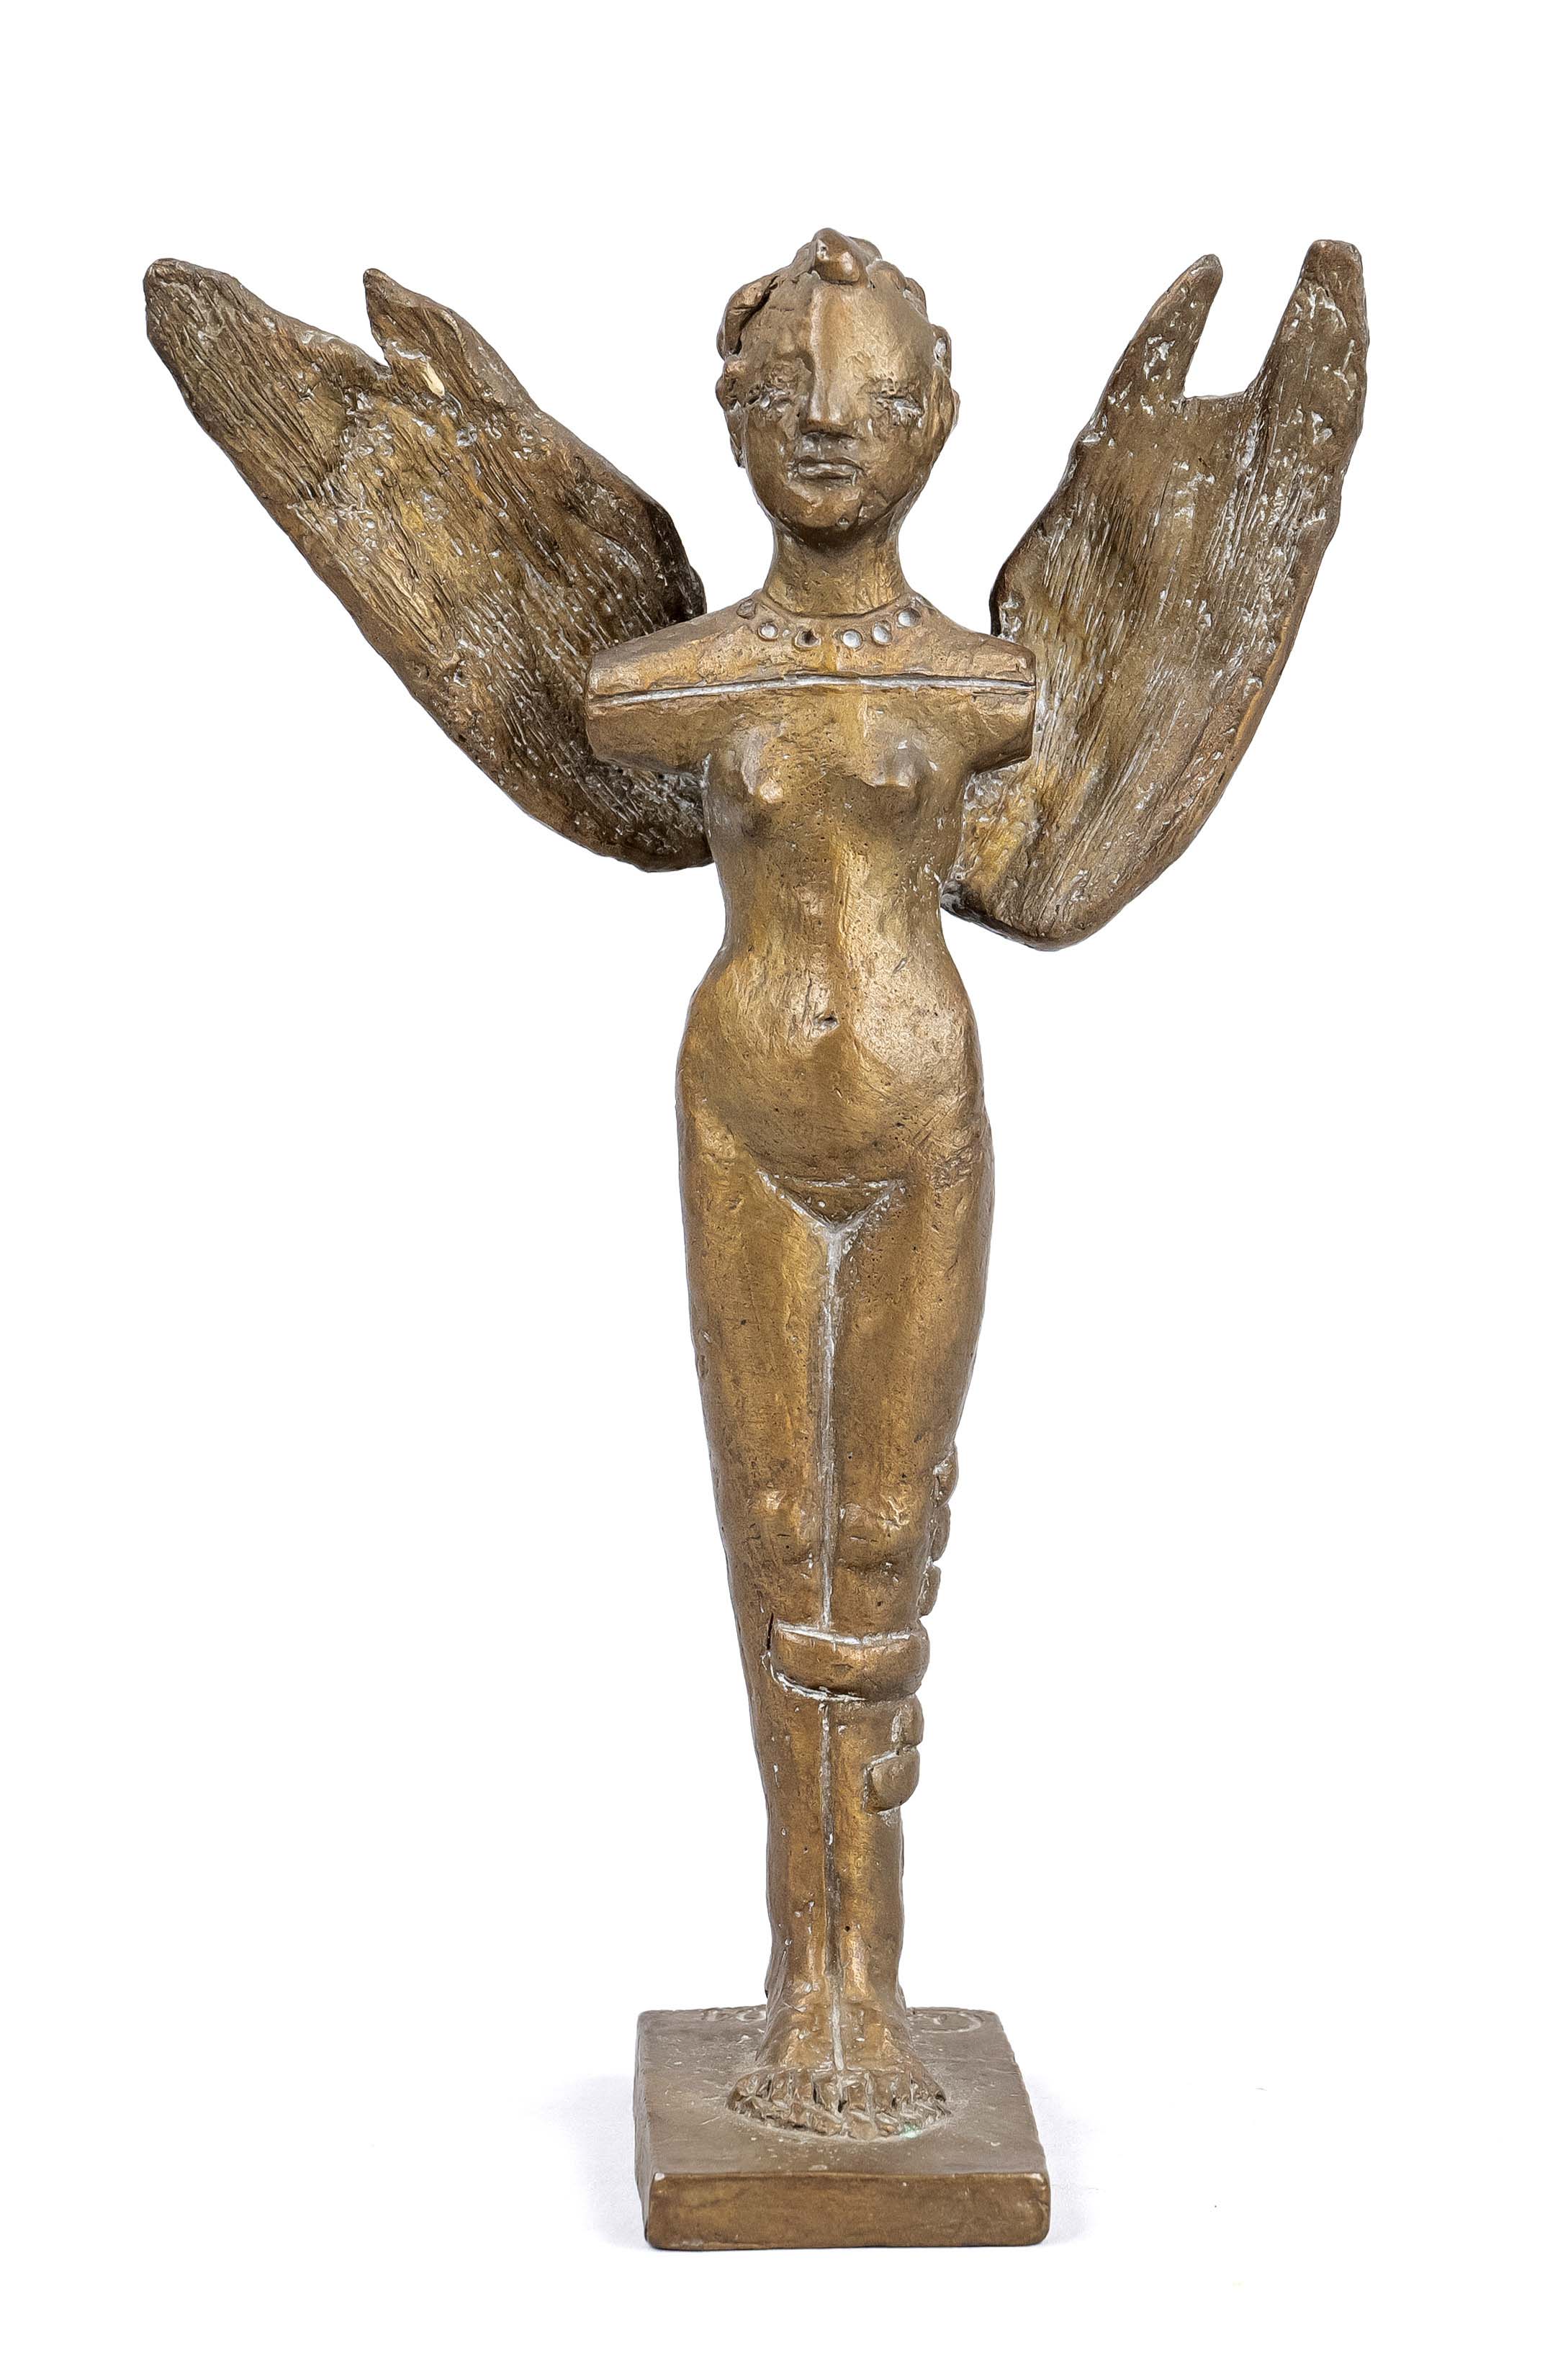 Eufe, Gisela. Contemporary sculptor, lives and works in Bremen and Worpswede. Winged female